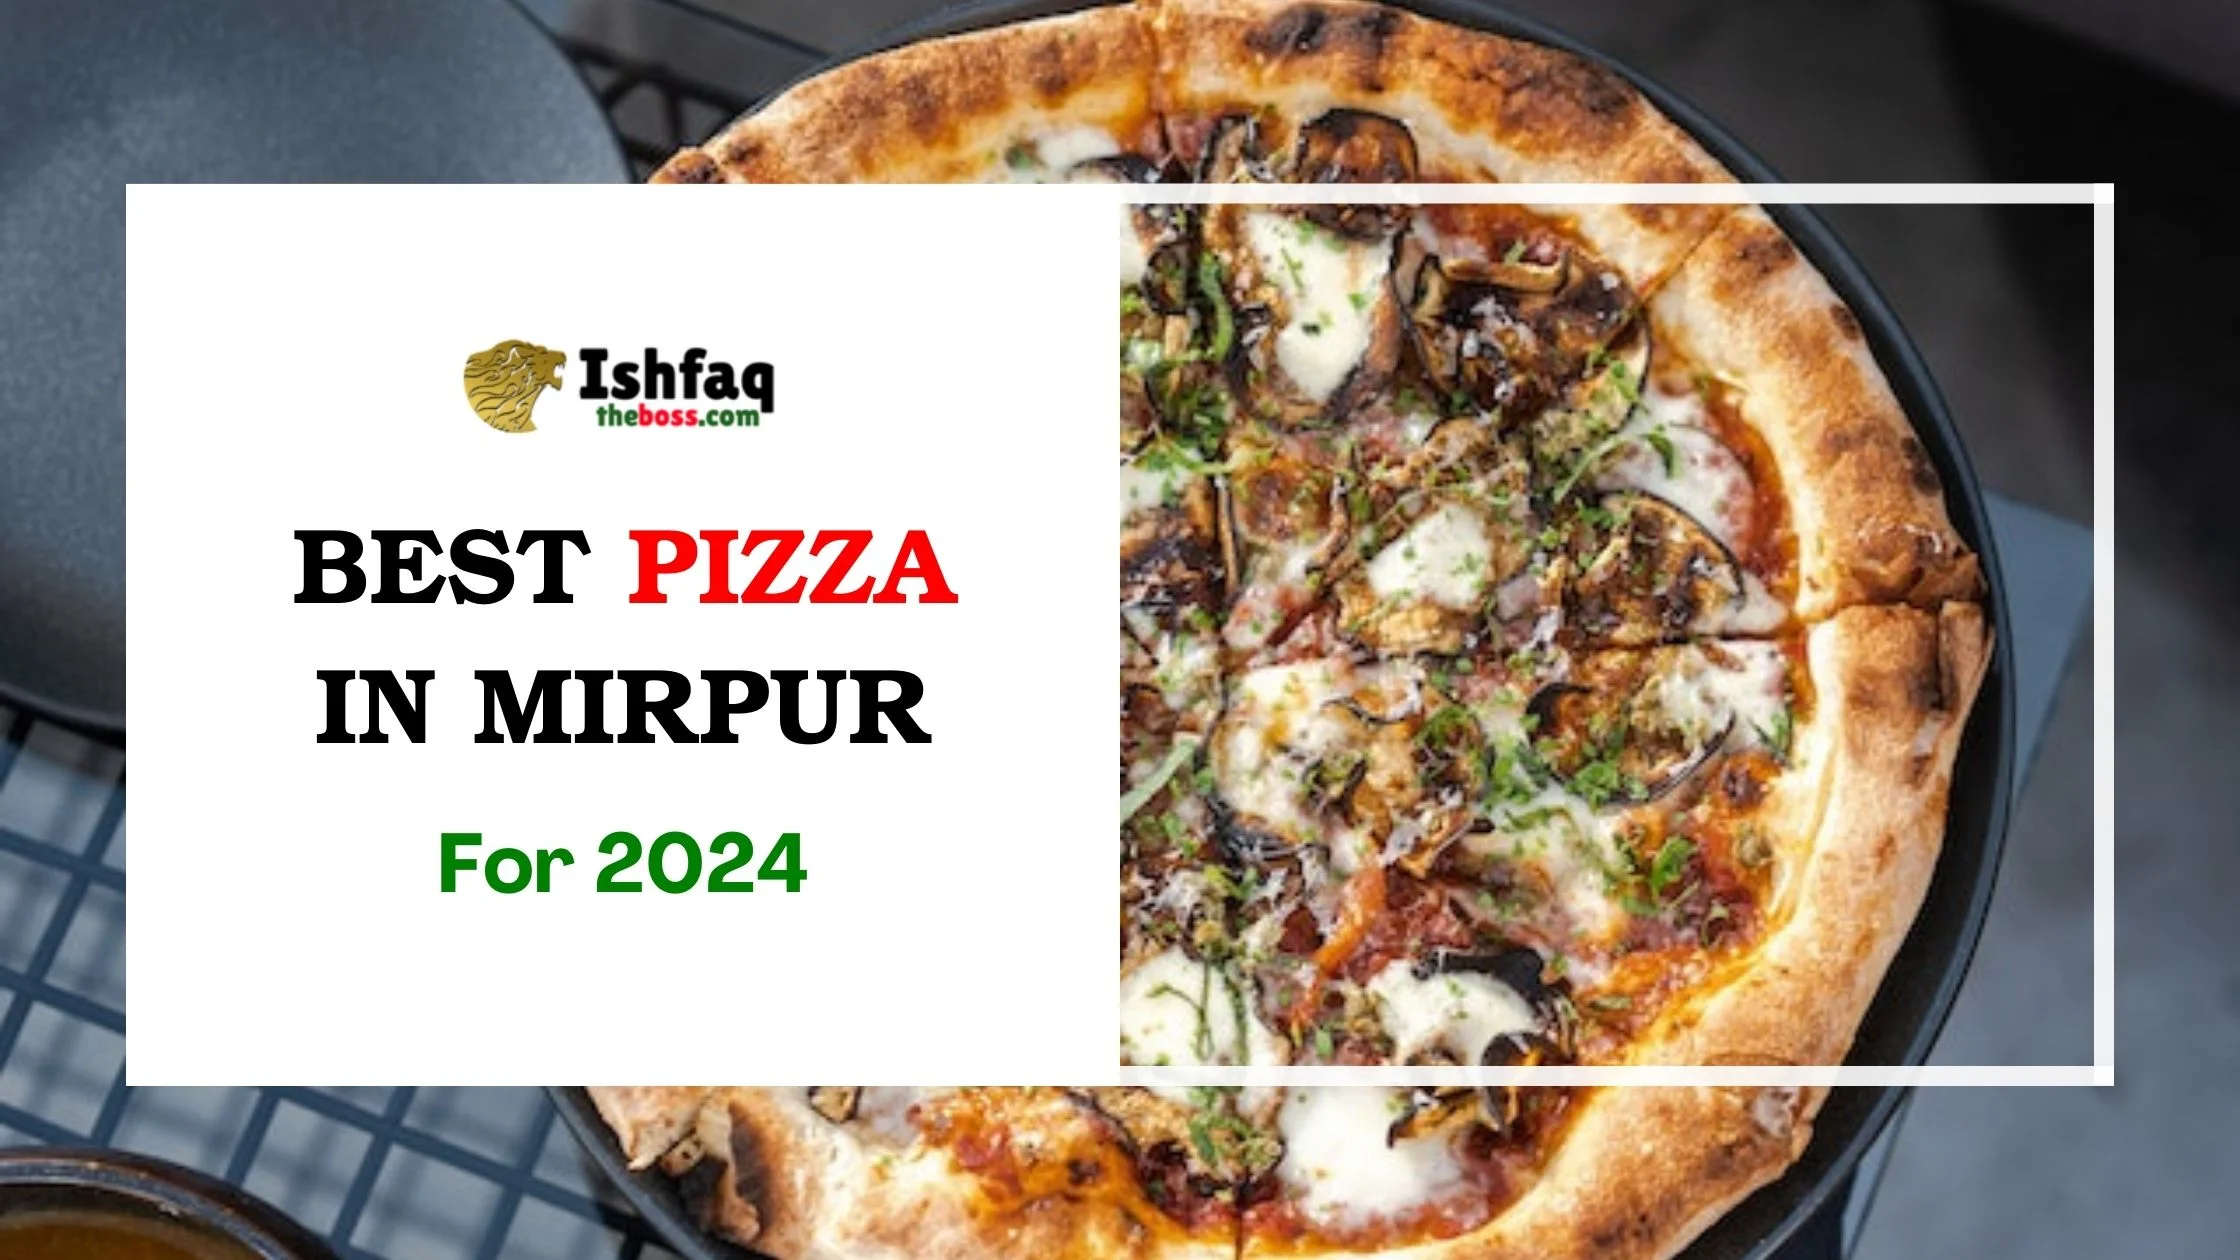 Best Pizza in Mirpur for 2024